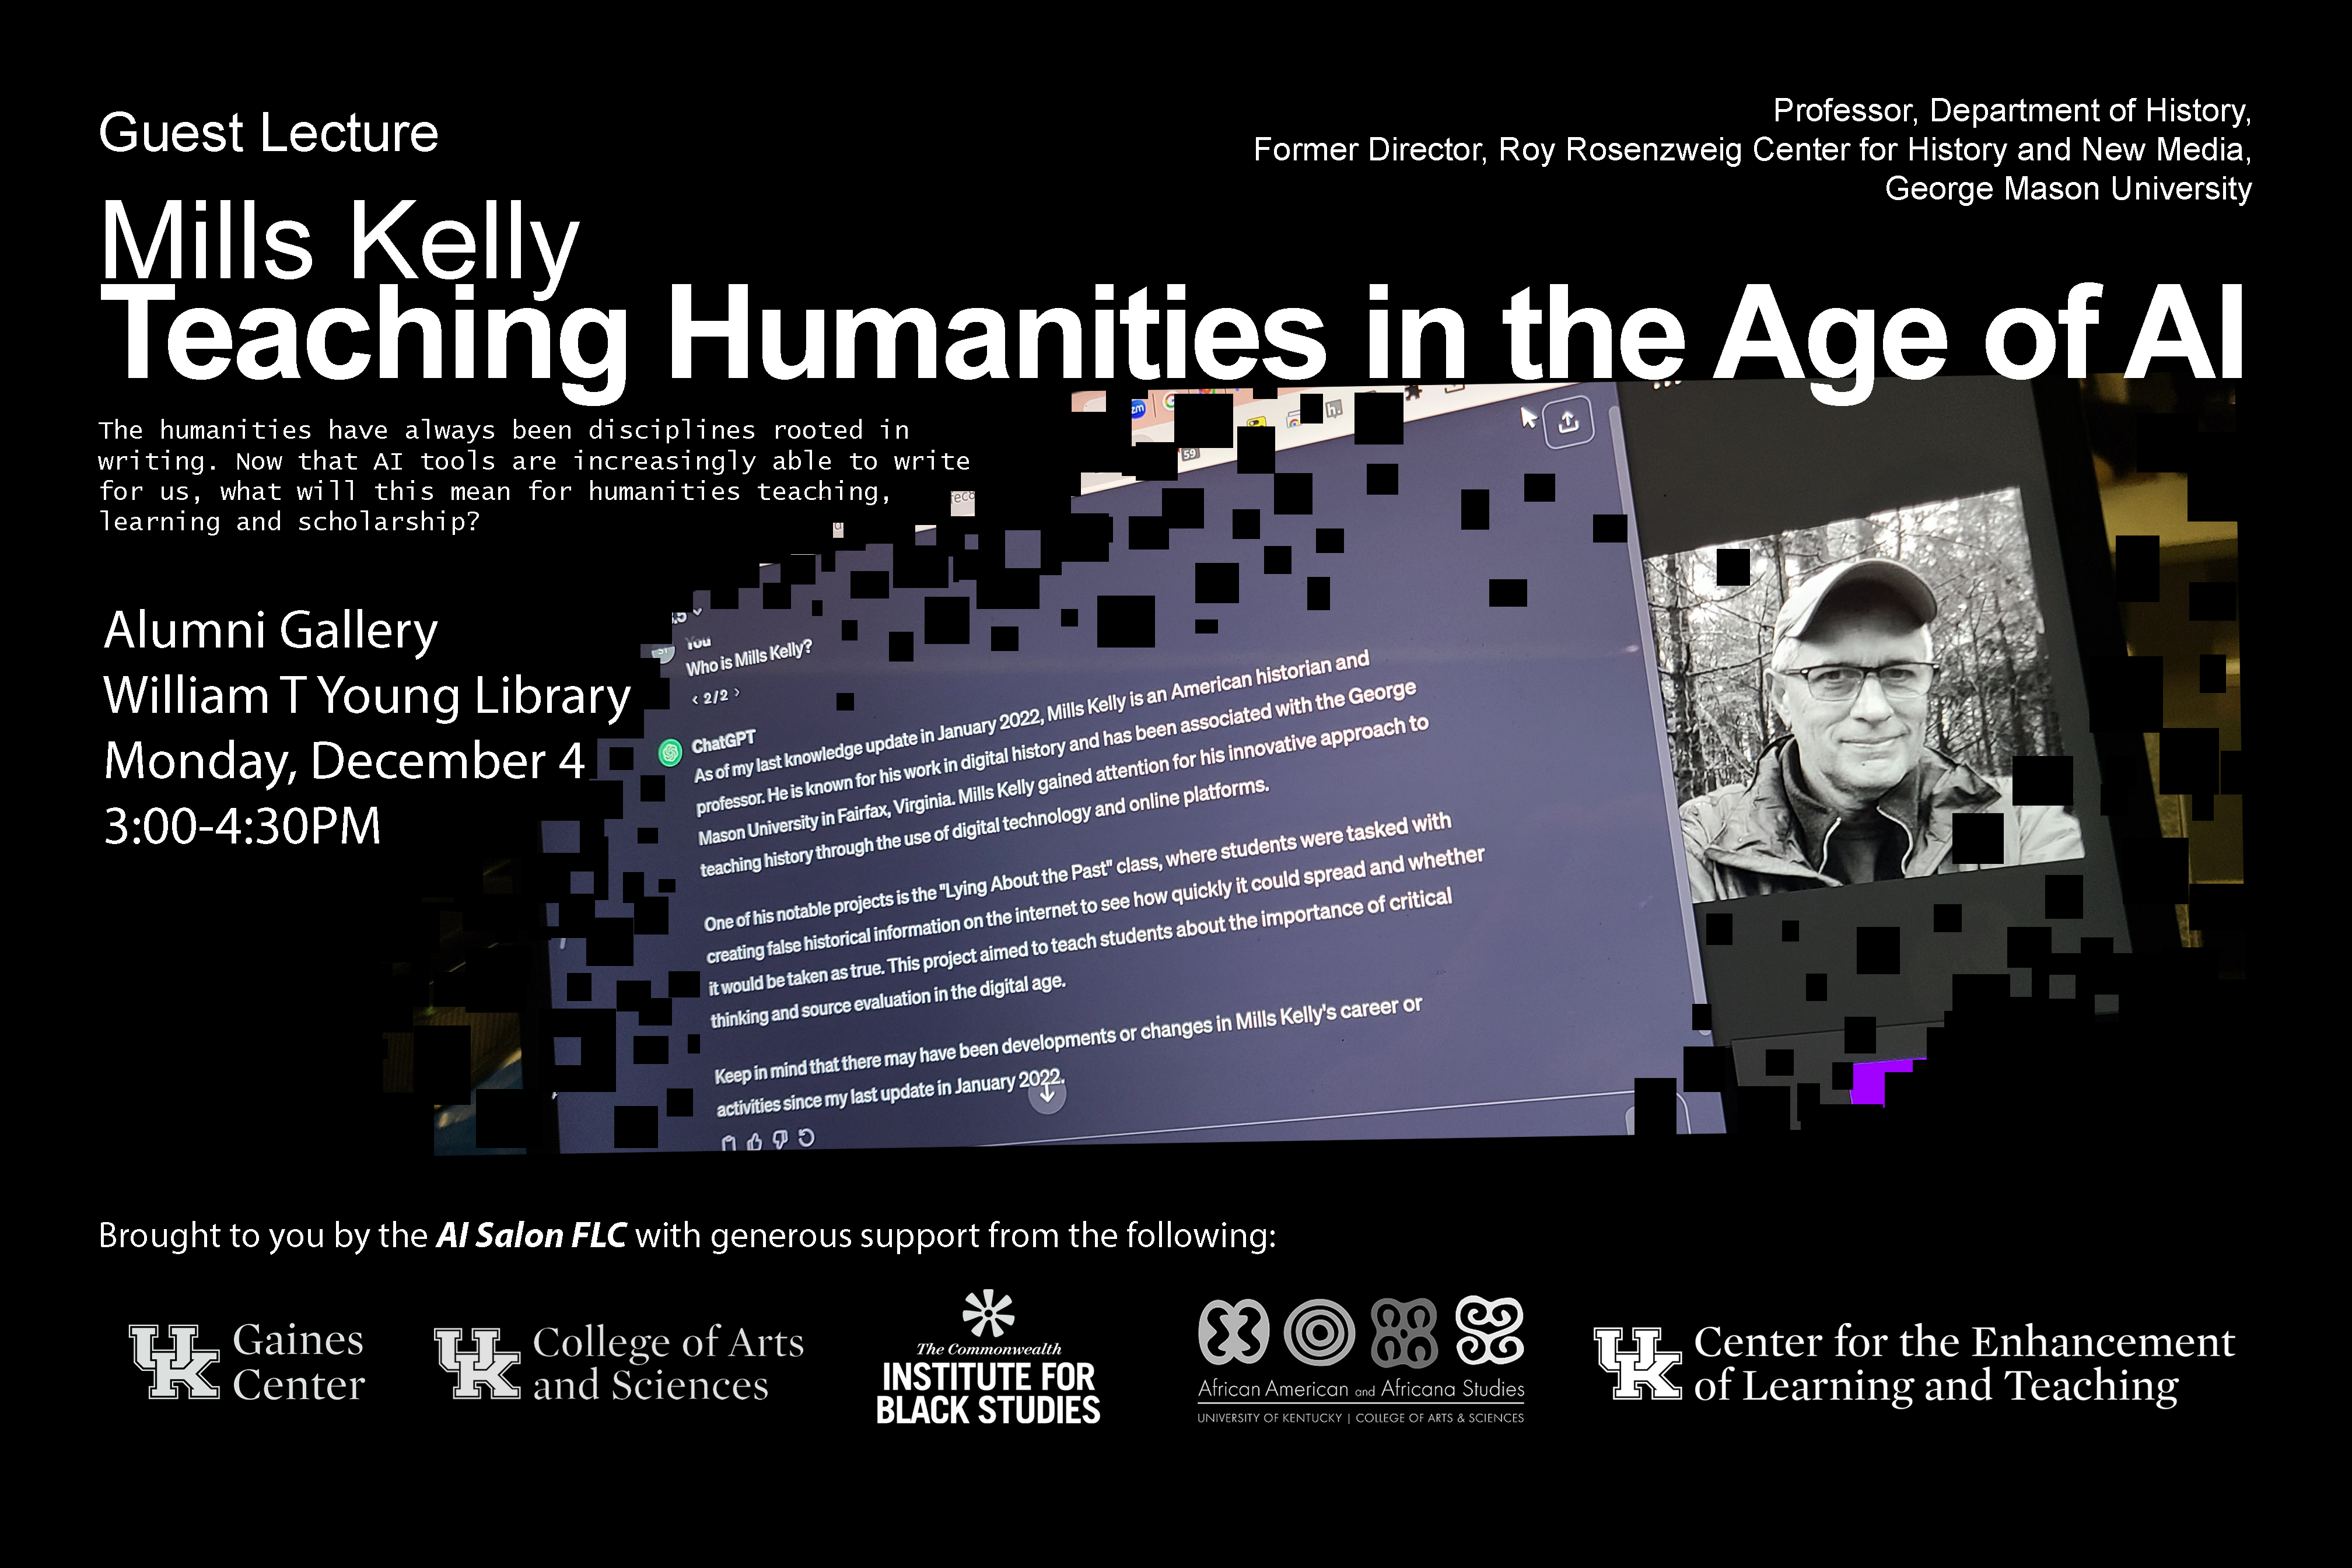 mills kelly: teaching humanities in the age of ai